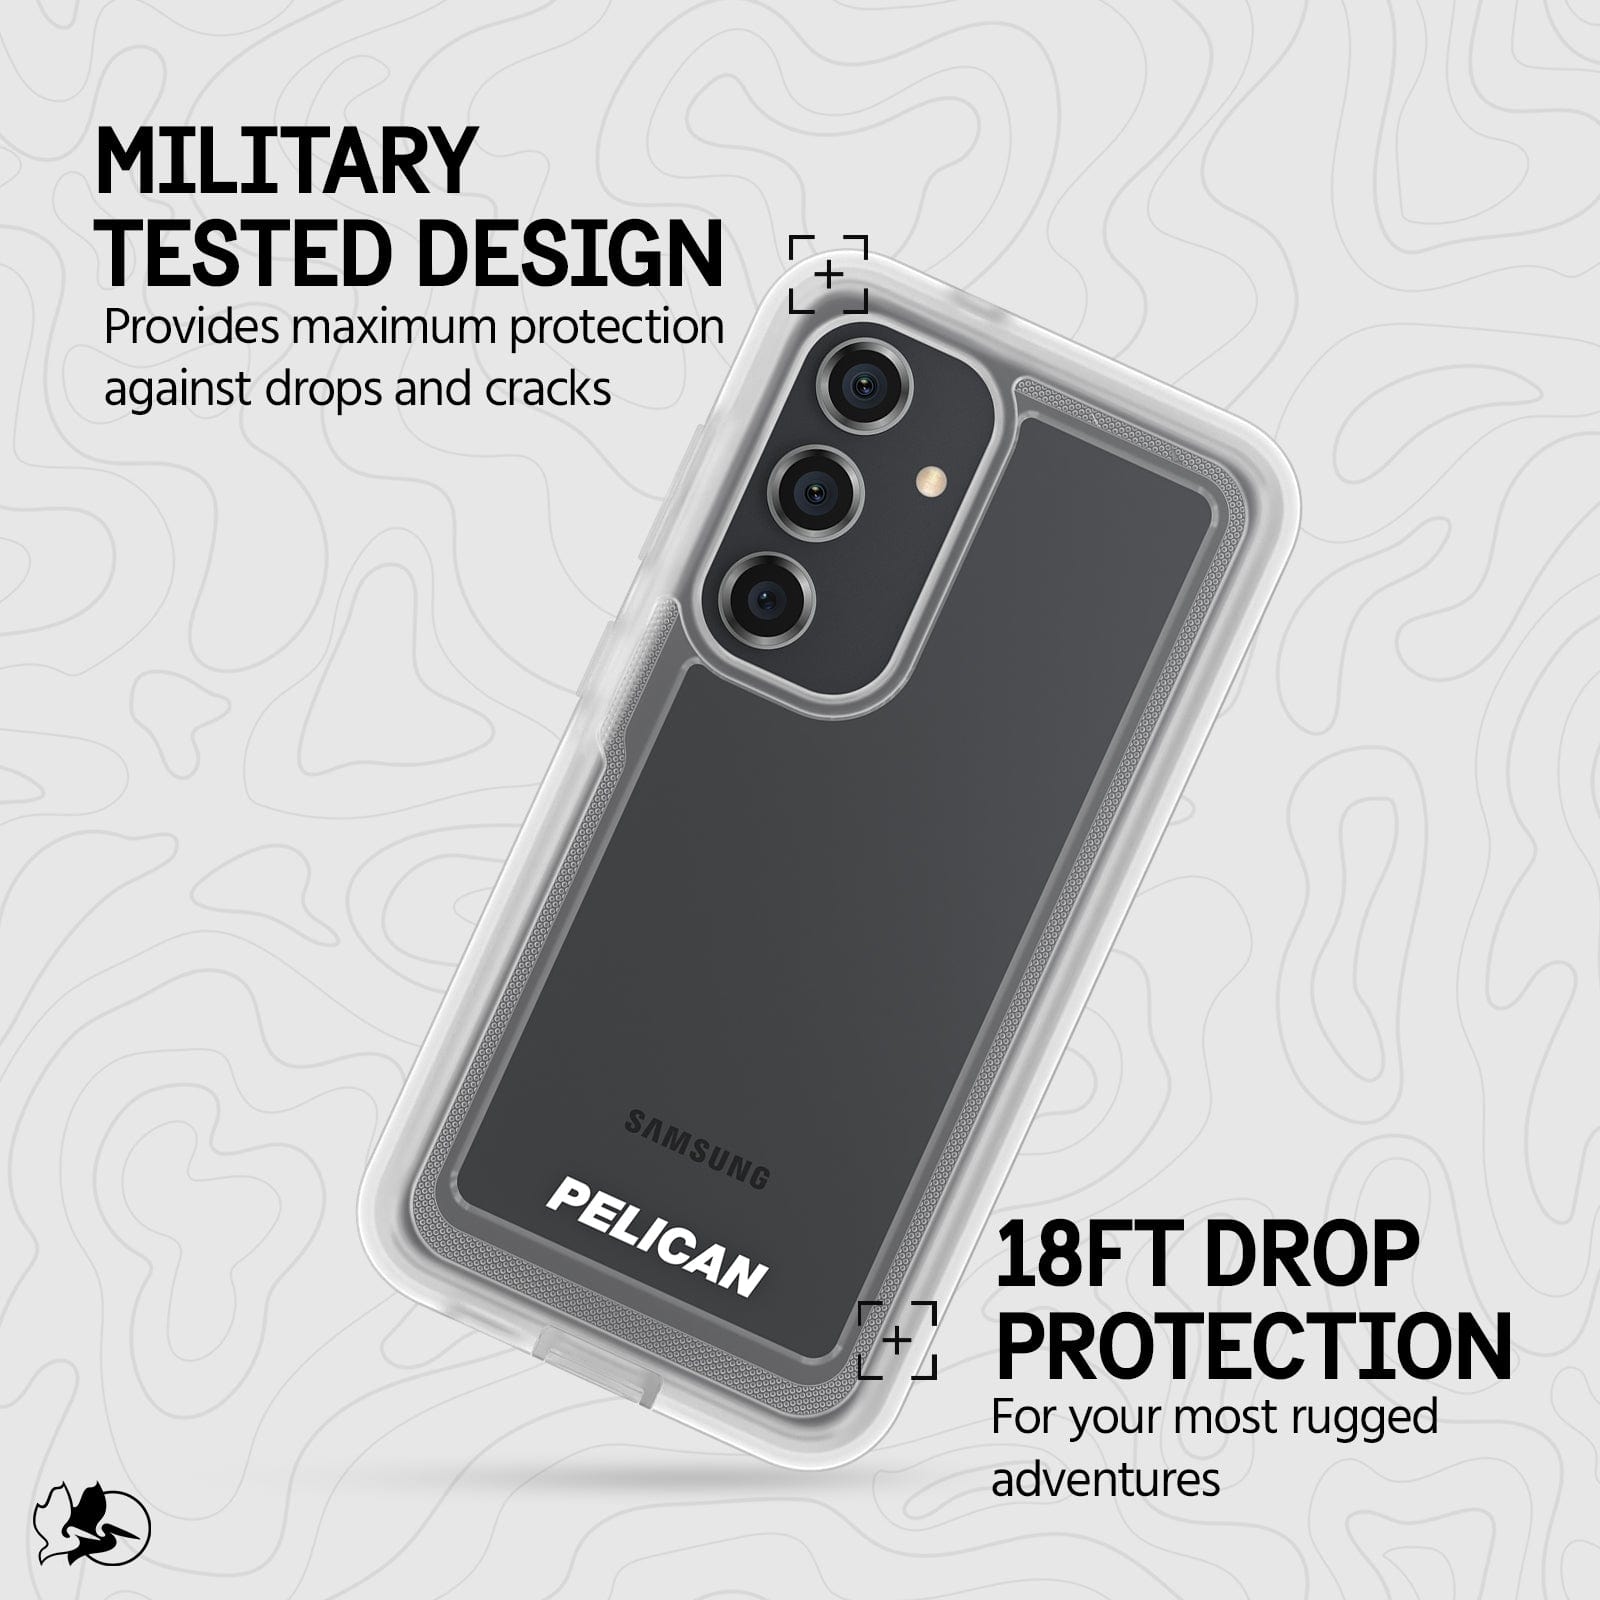 Military Tested Design. Provides maximum protection against drops and cracks. 18ft drop protection. For your most rugged adventures.